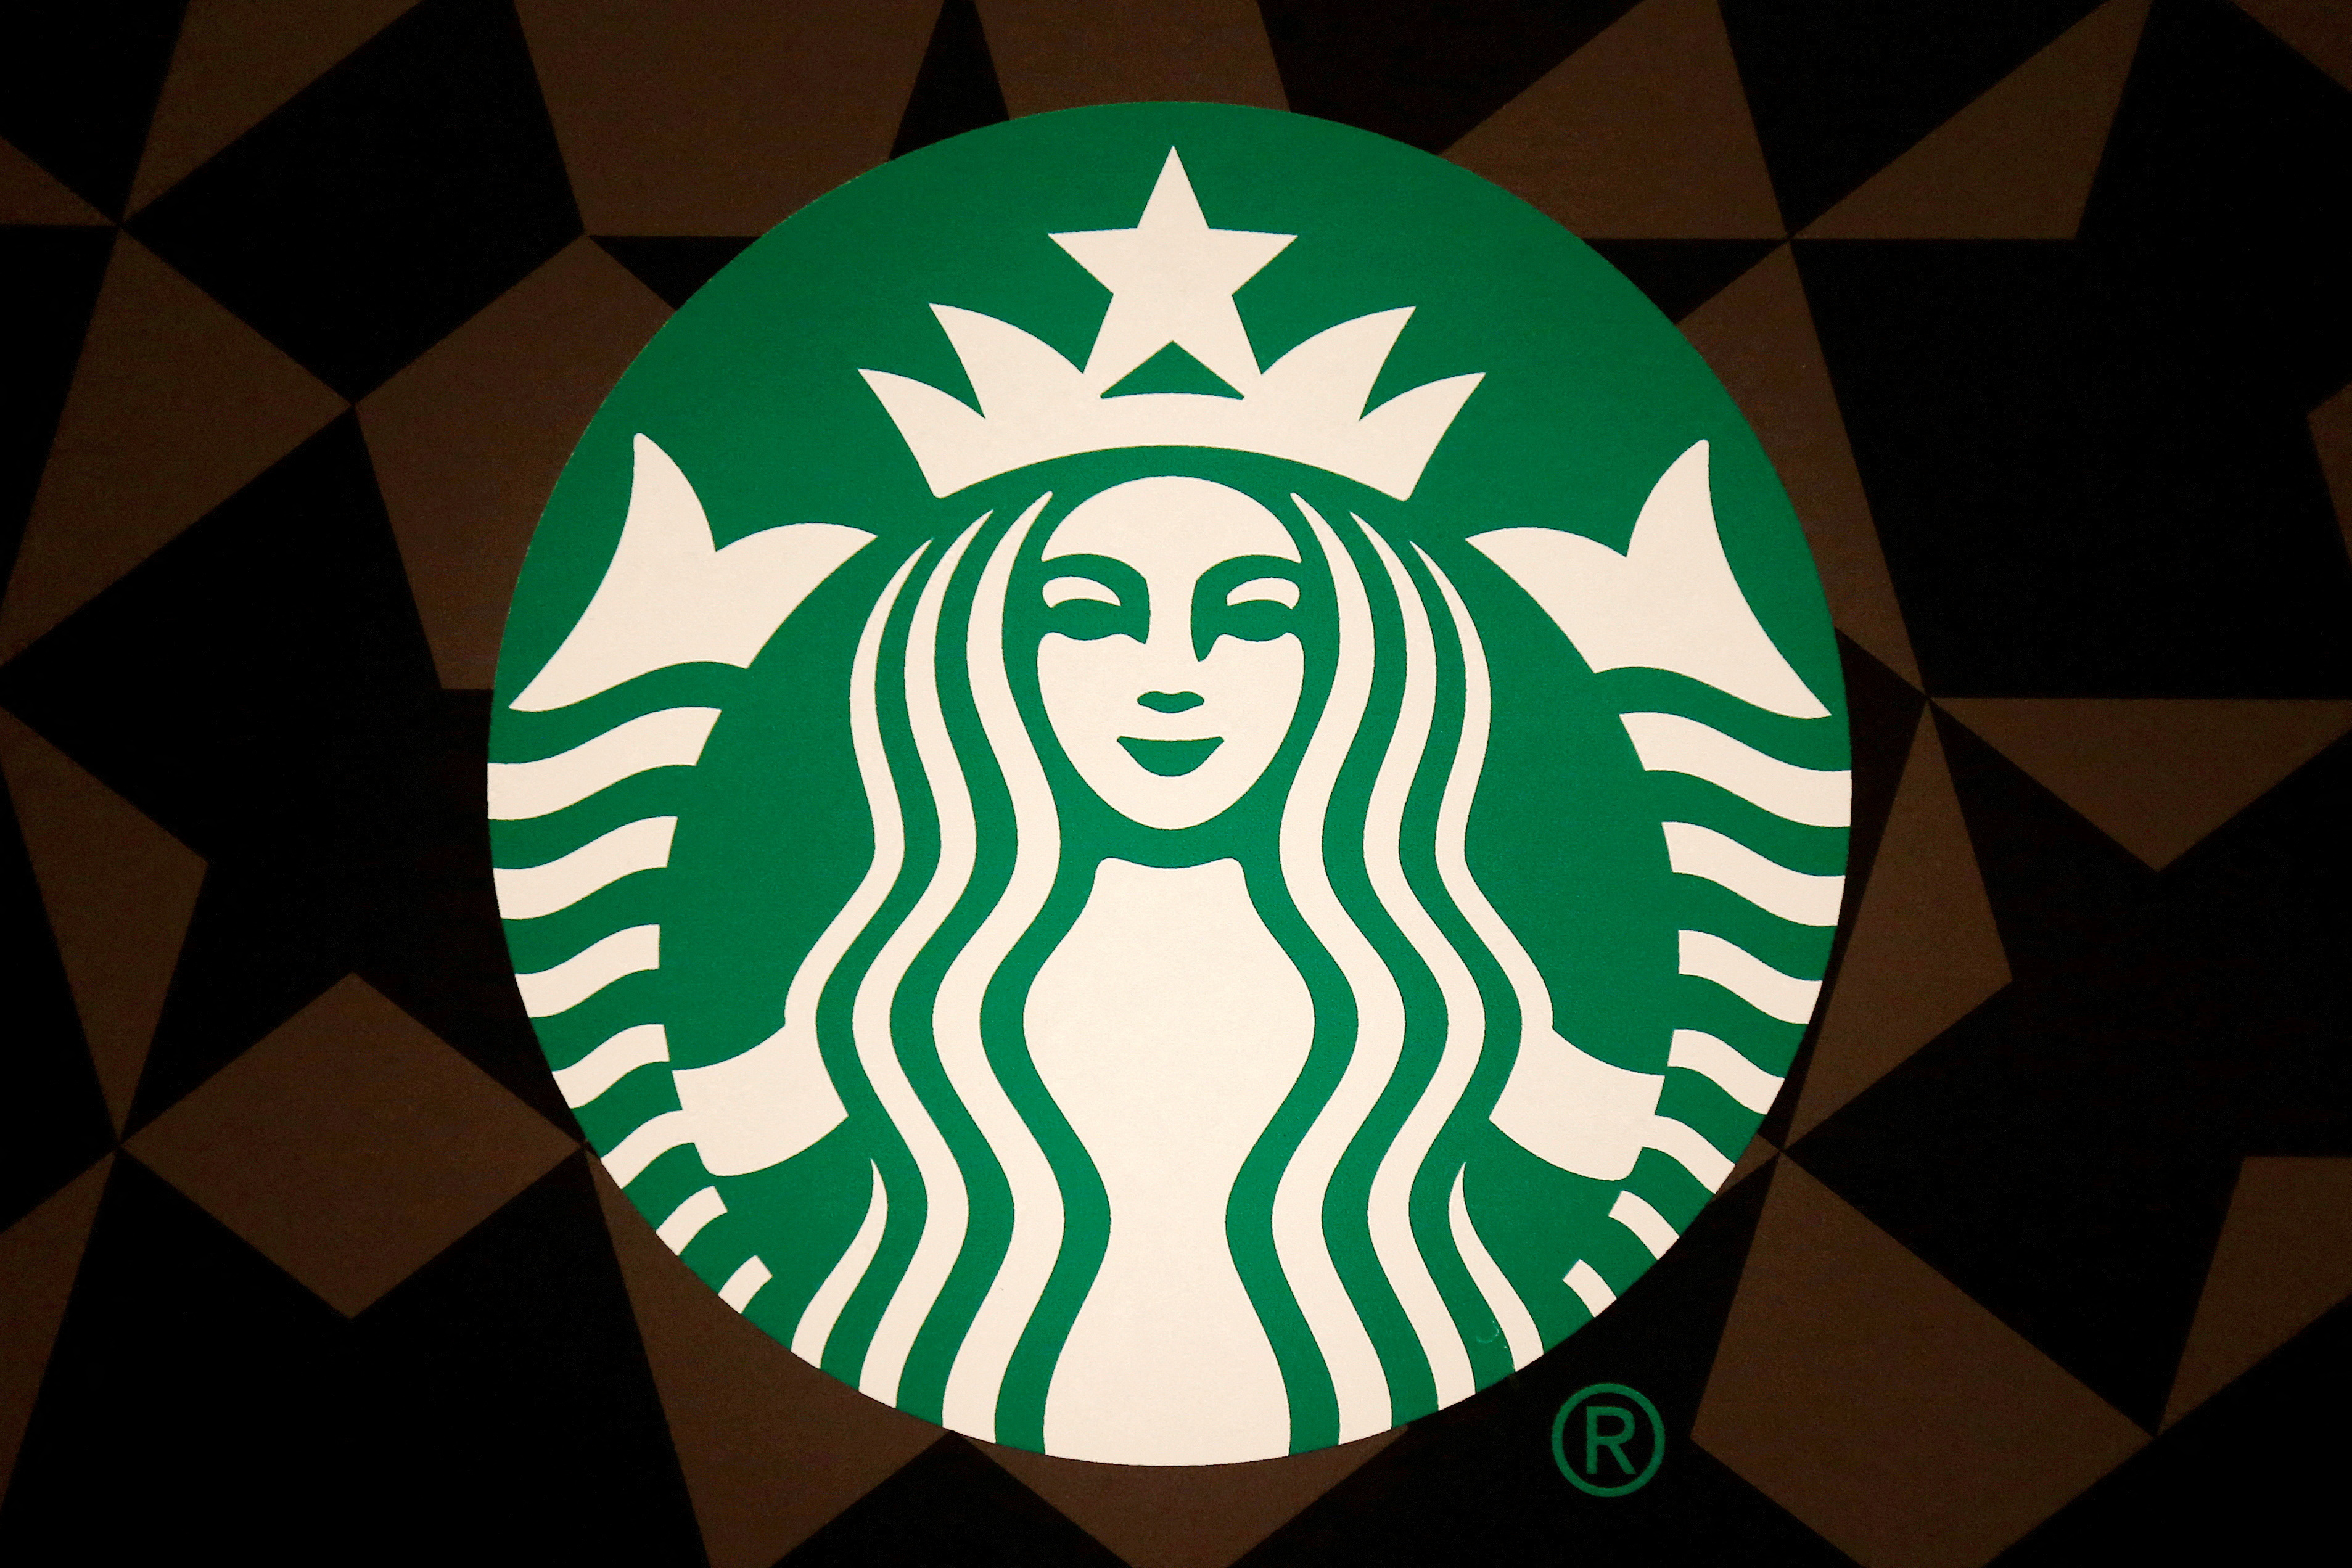 FILE PHOTO: A Starbucks logo is pictured on the door of the Green Apron Delivery Service at the Empire State Building in New York